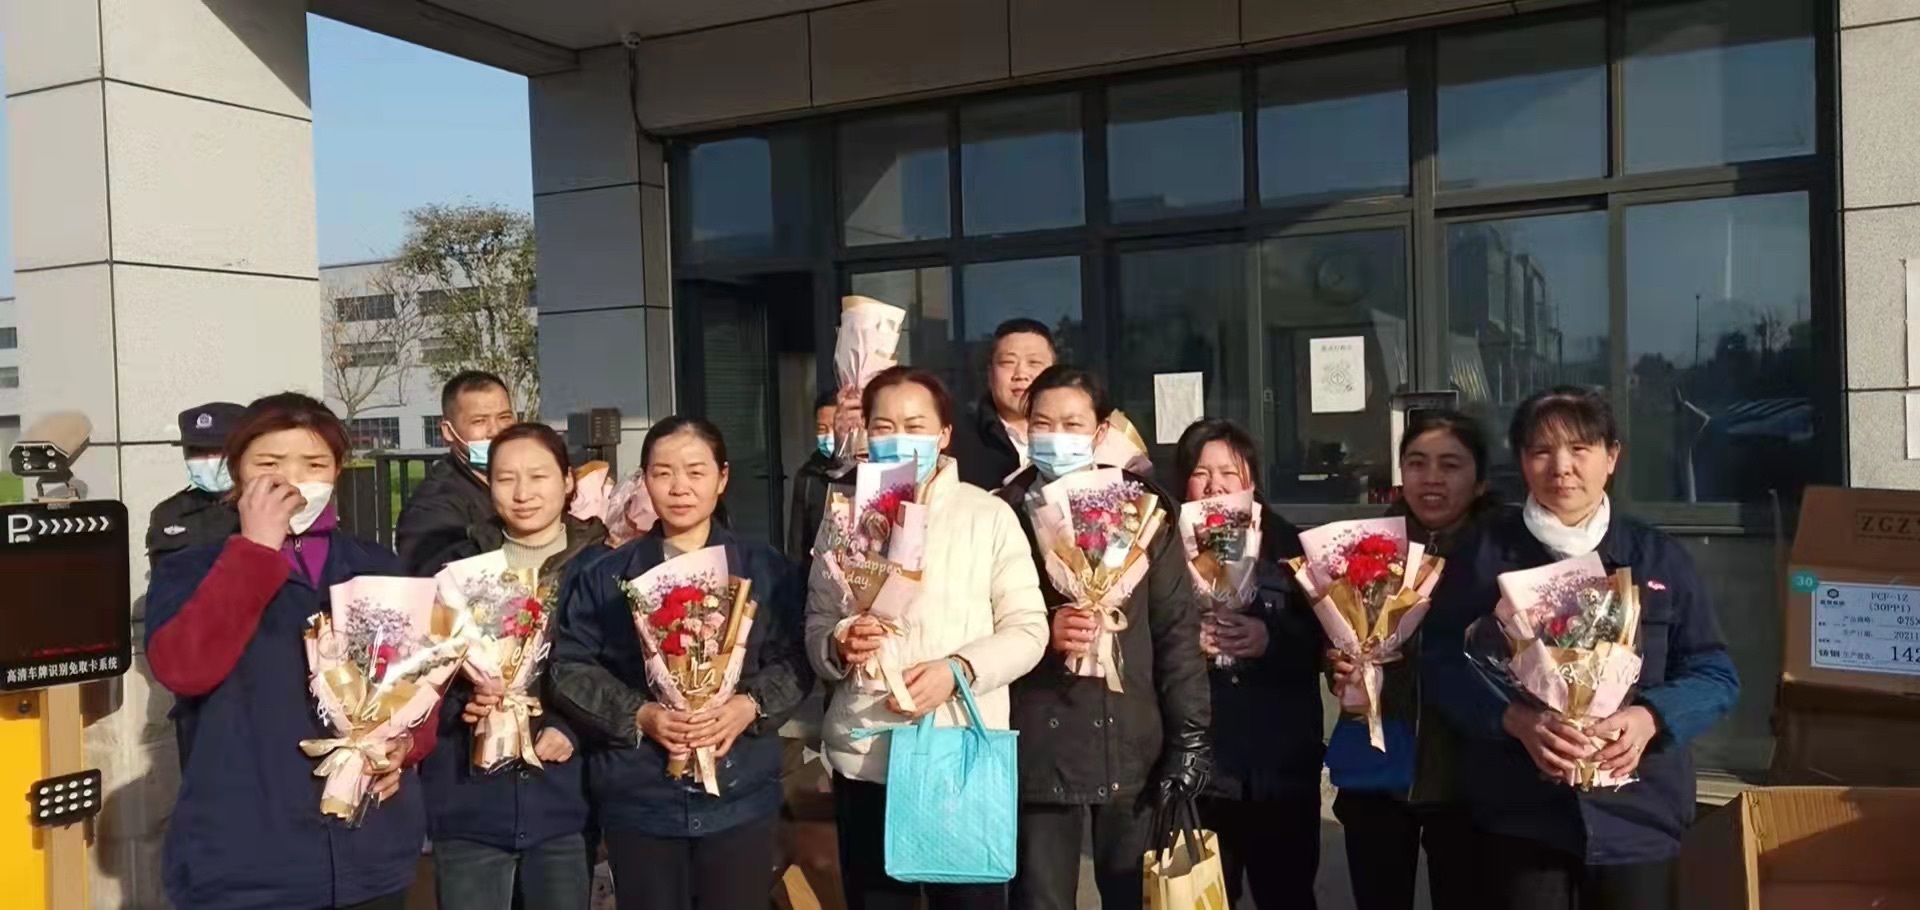 The Labor Union of Shenli Electric machinery organized the activity of sending flowers and blessing to women's Day